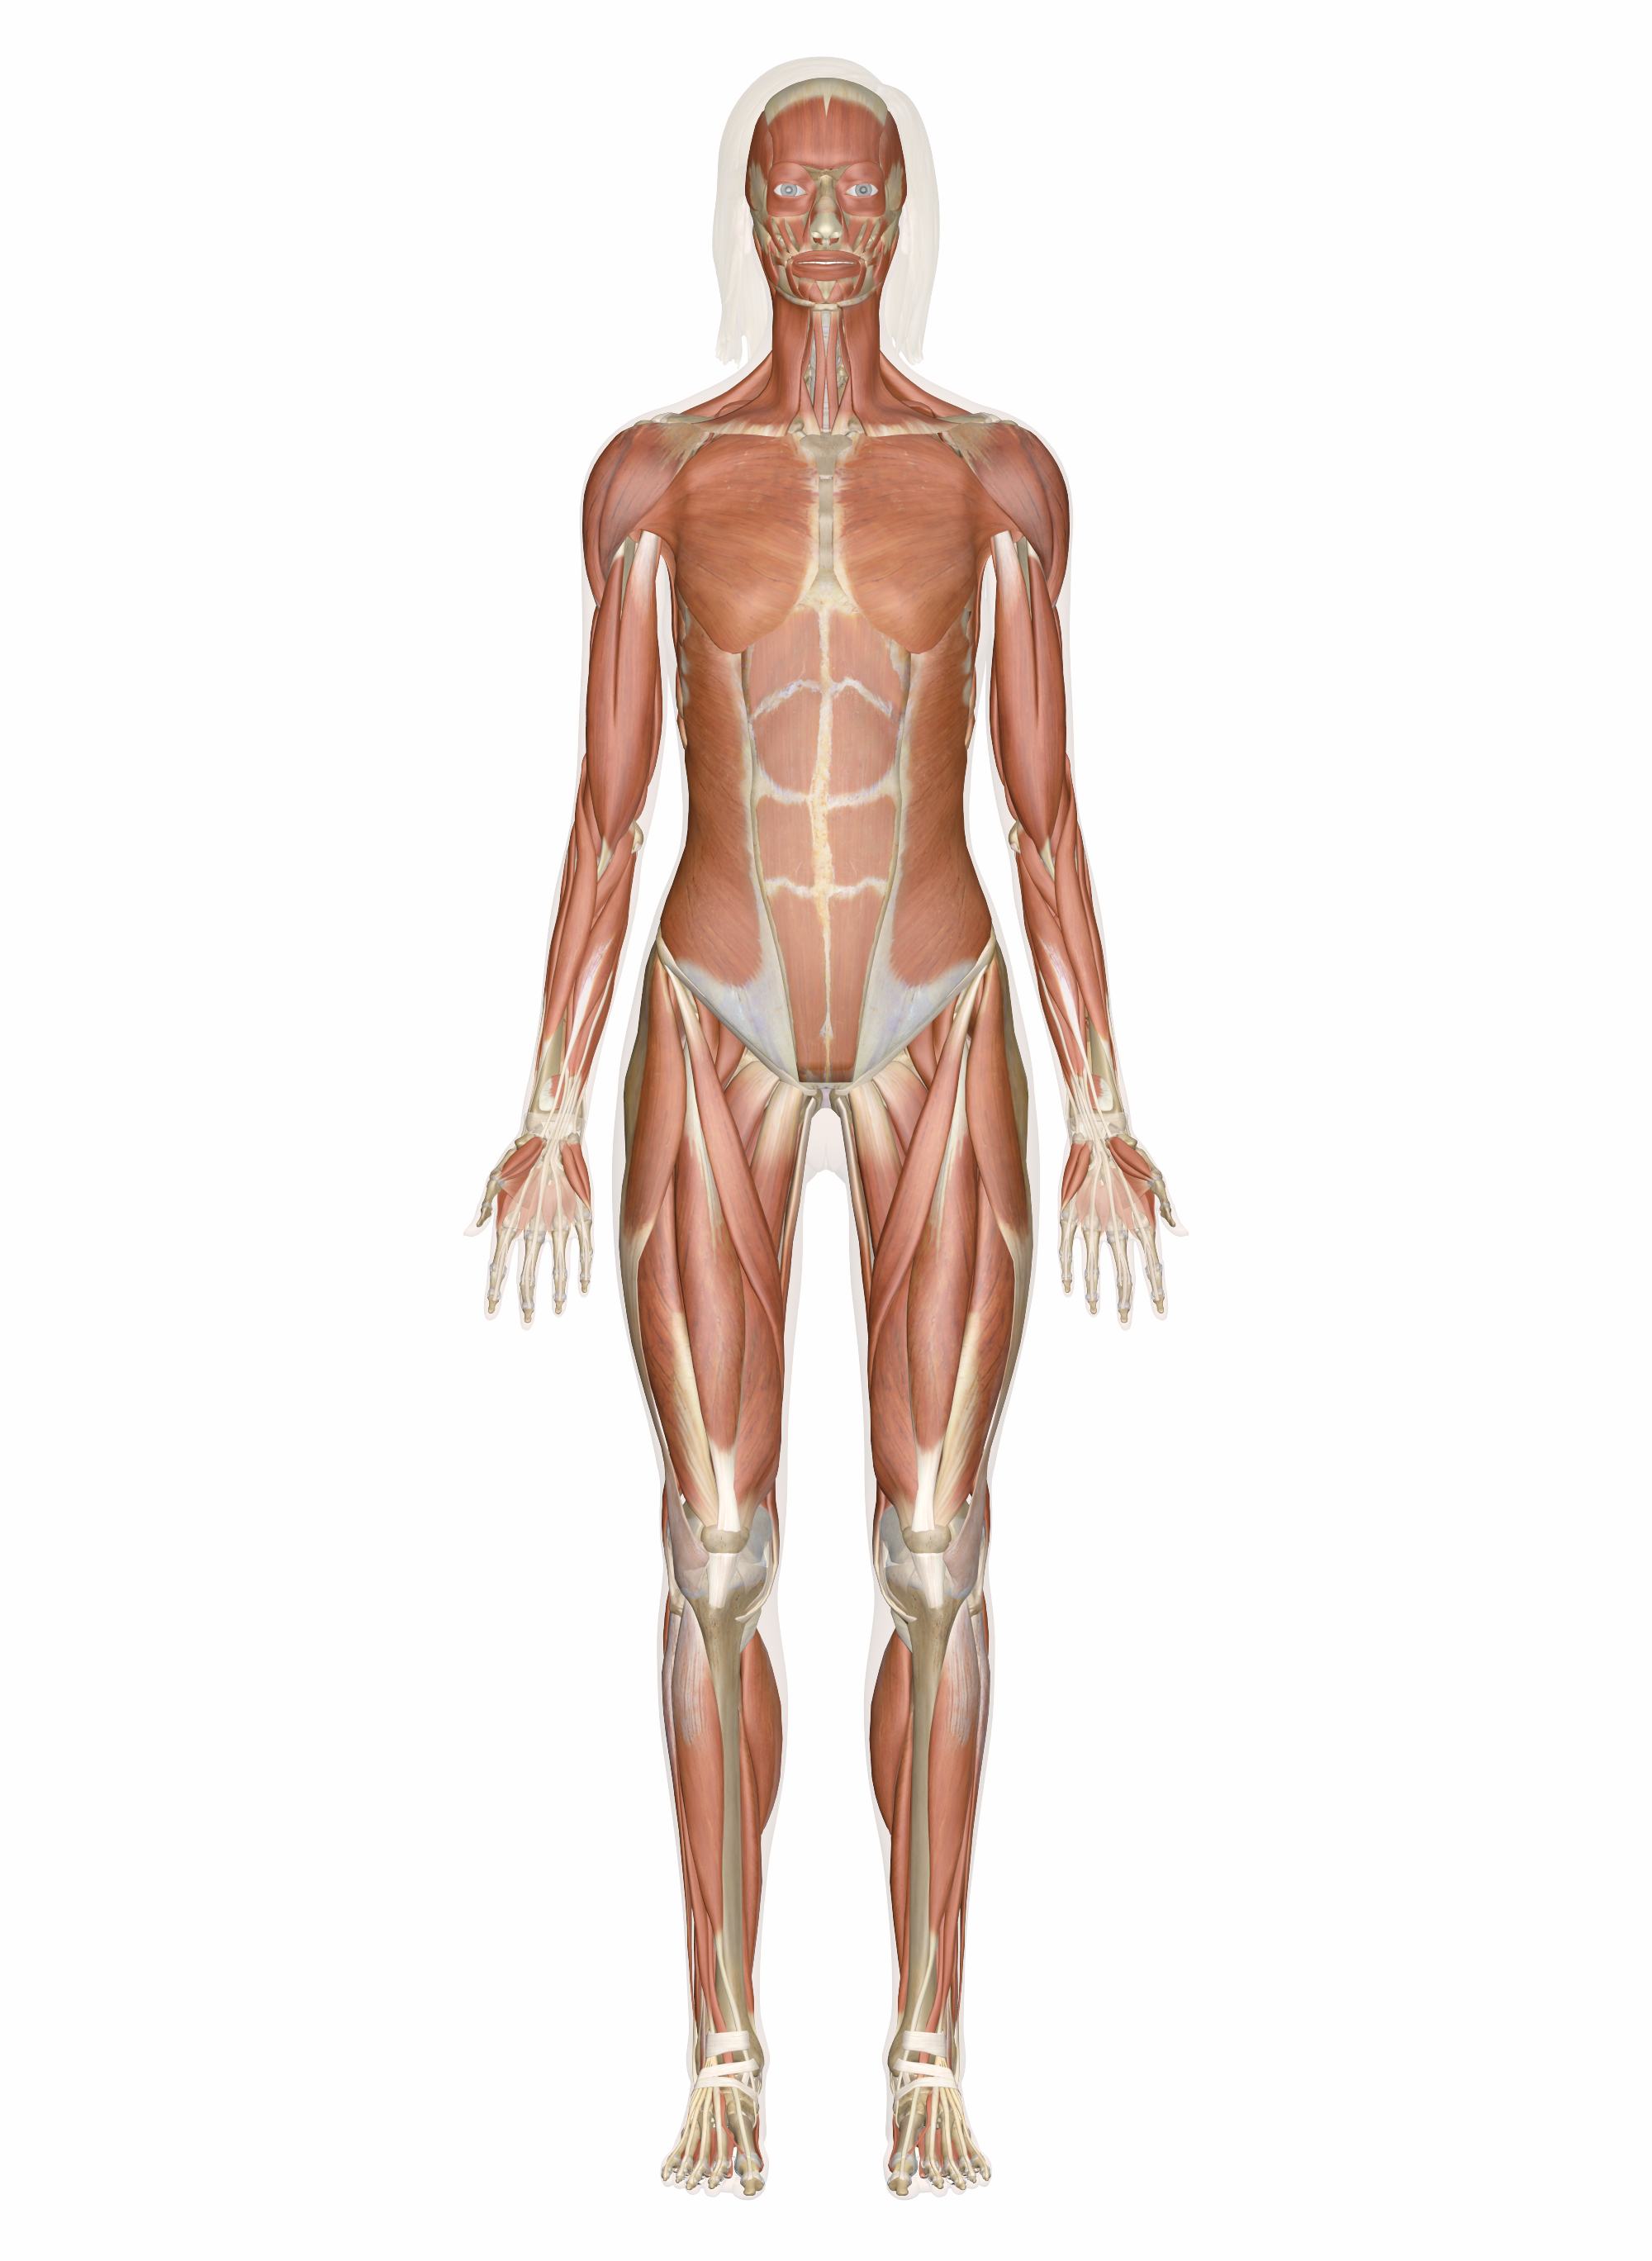 Human Anatomy Diagram Muscular System Muscles Of The Human Body